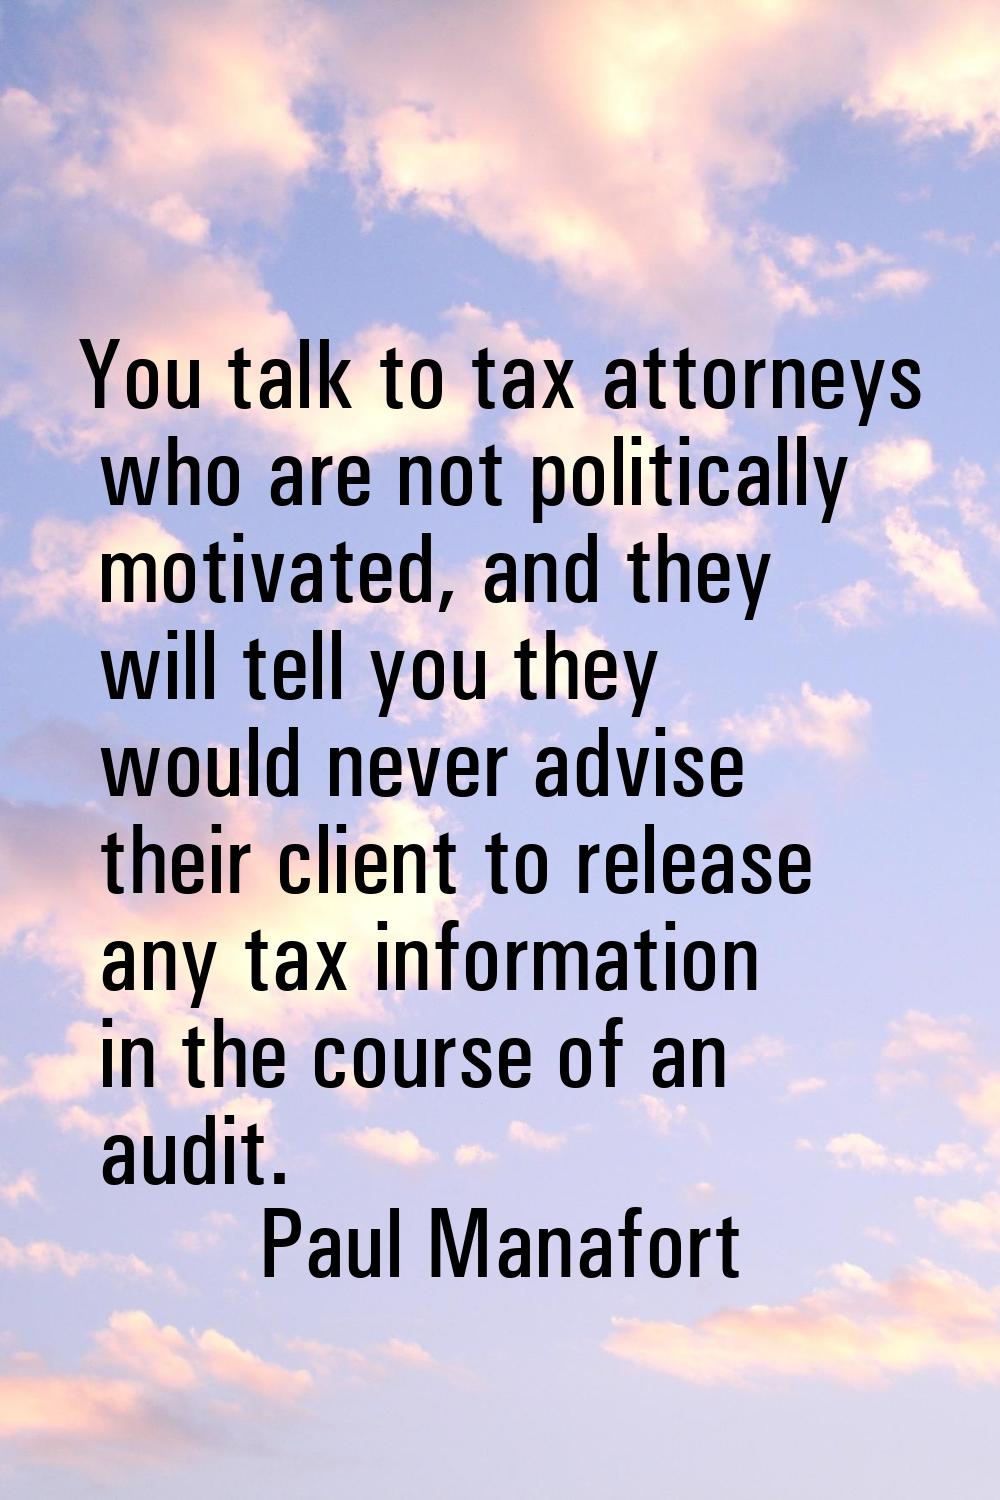 You talk to tax attorneys who are not politically motivated, and they will tell you they would neve